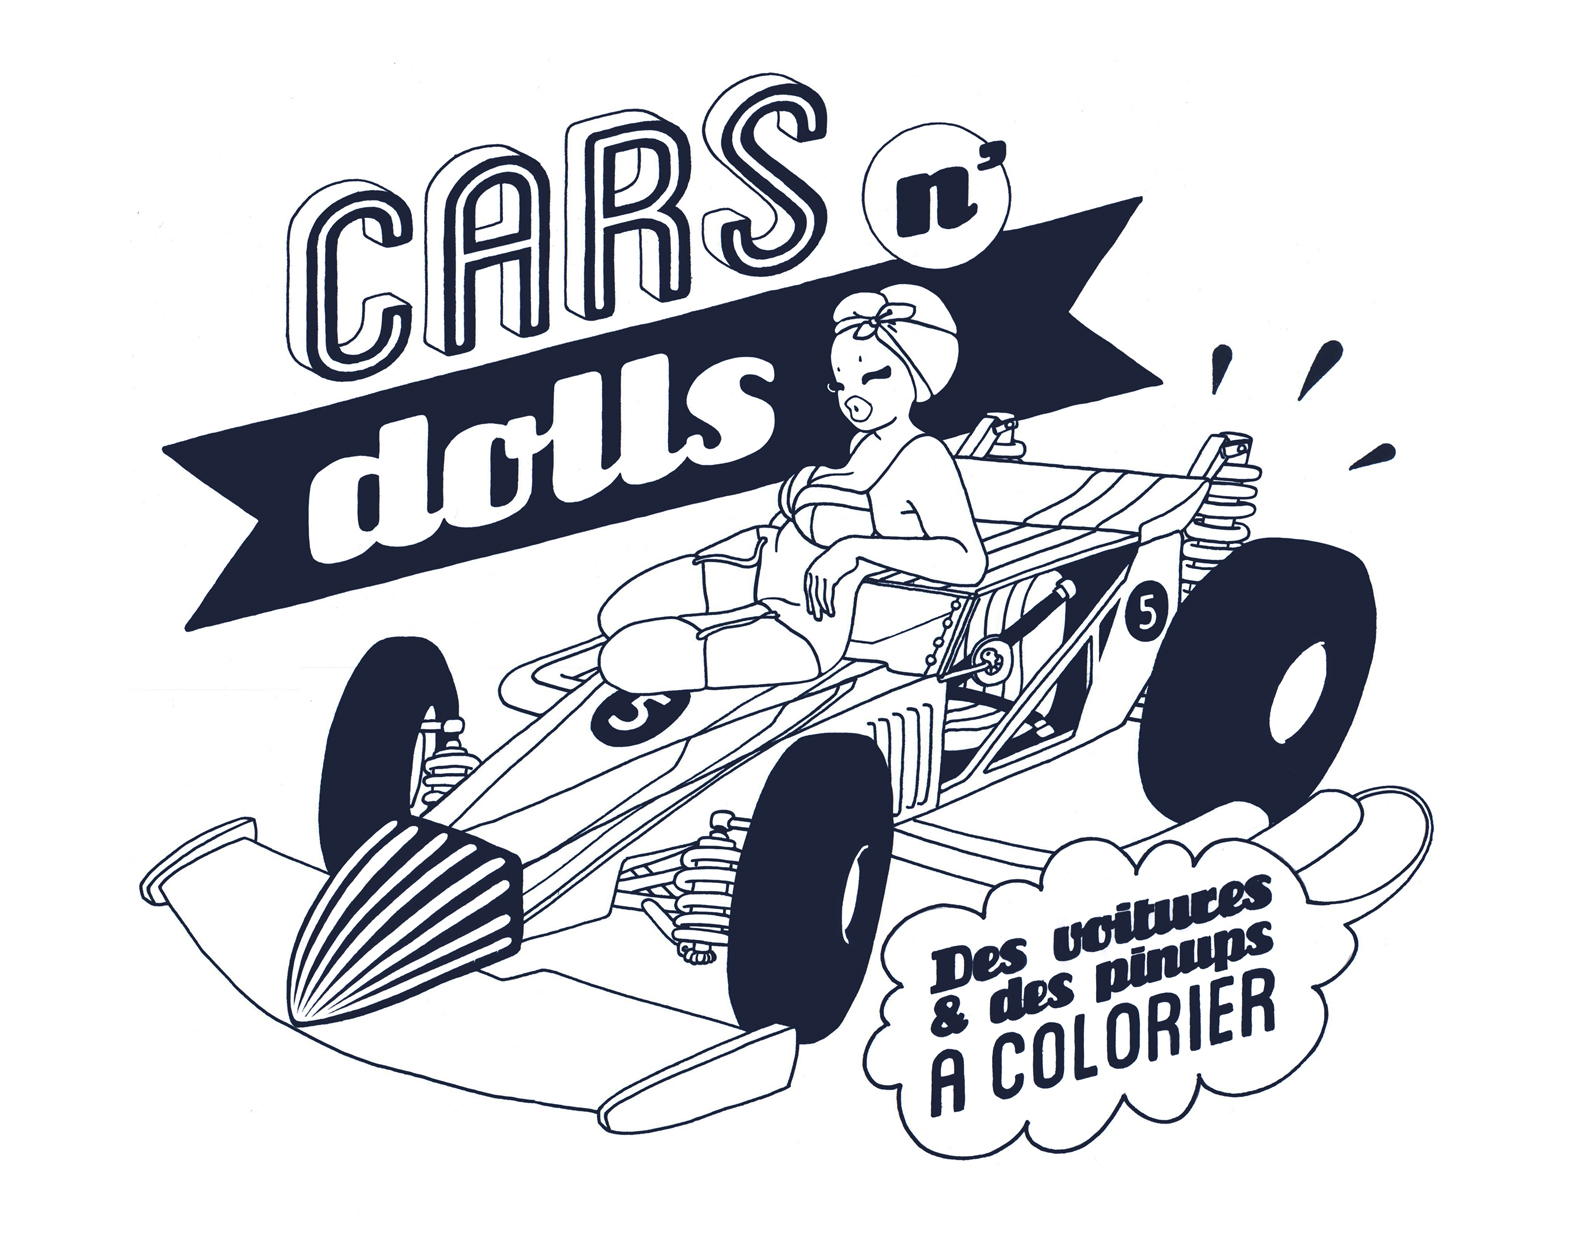 Cars n dolls - Image with : Car